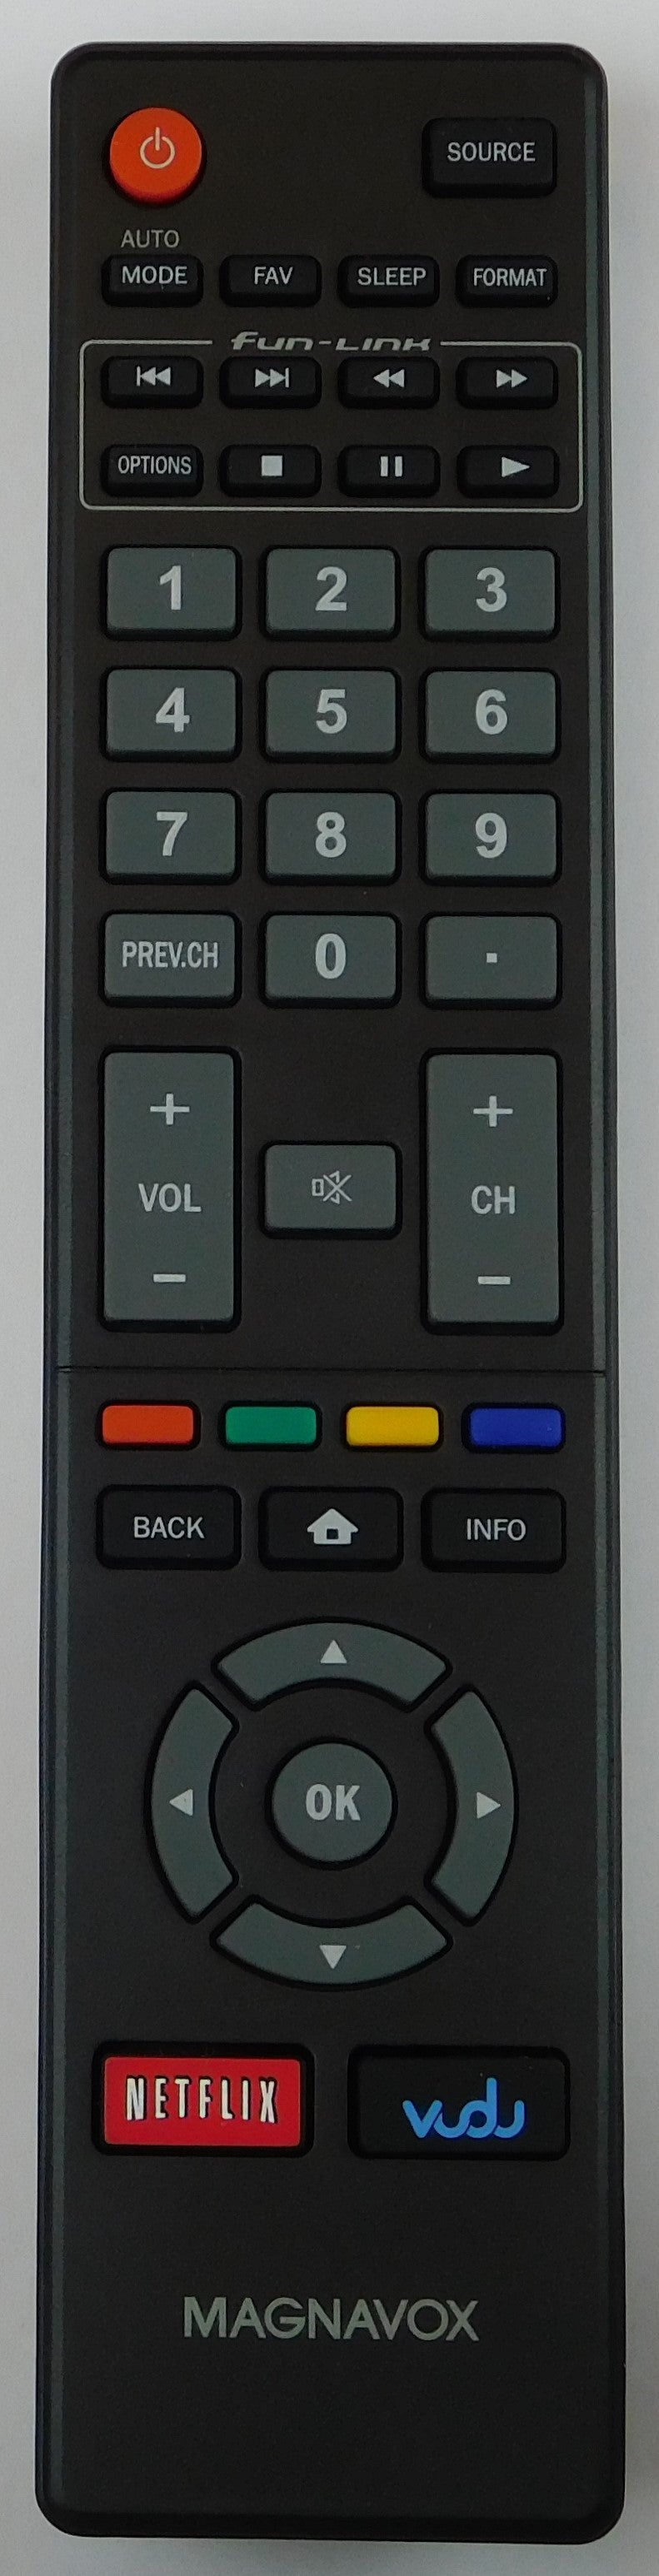 Original OEM replacement remote control for Magnavox LED/LCD TVs NH401UD